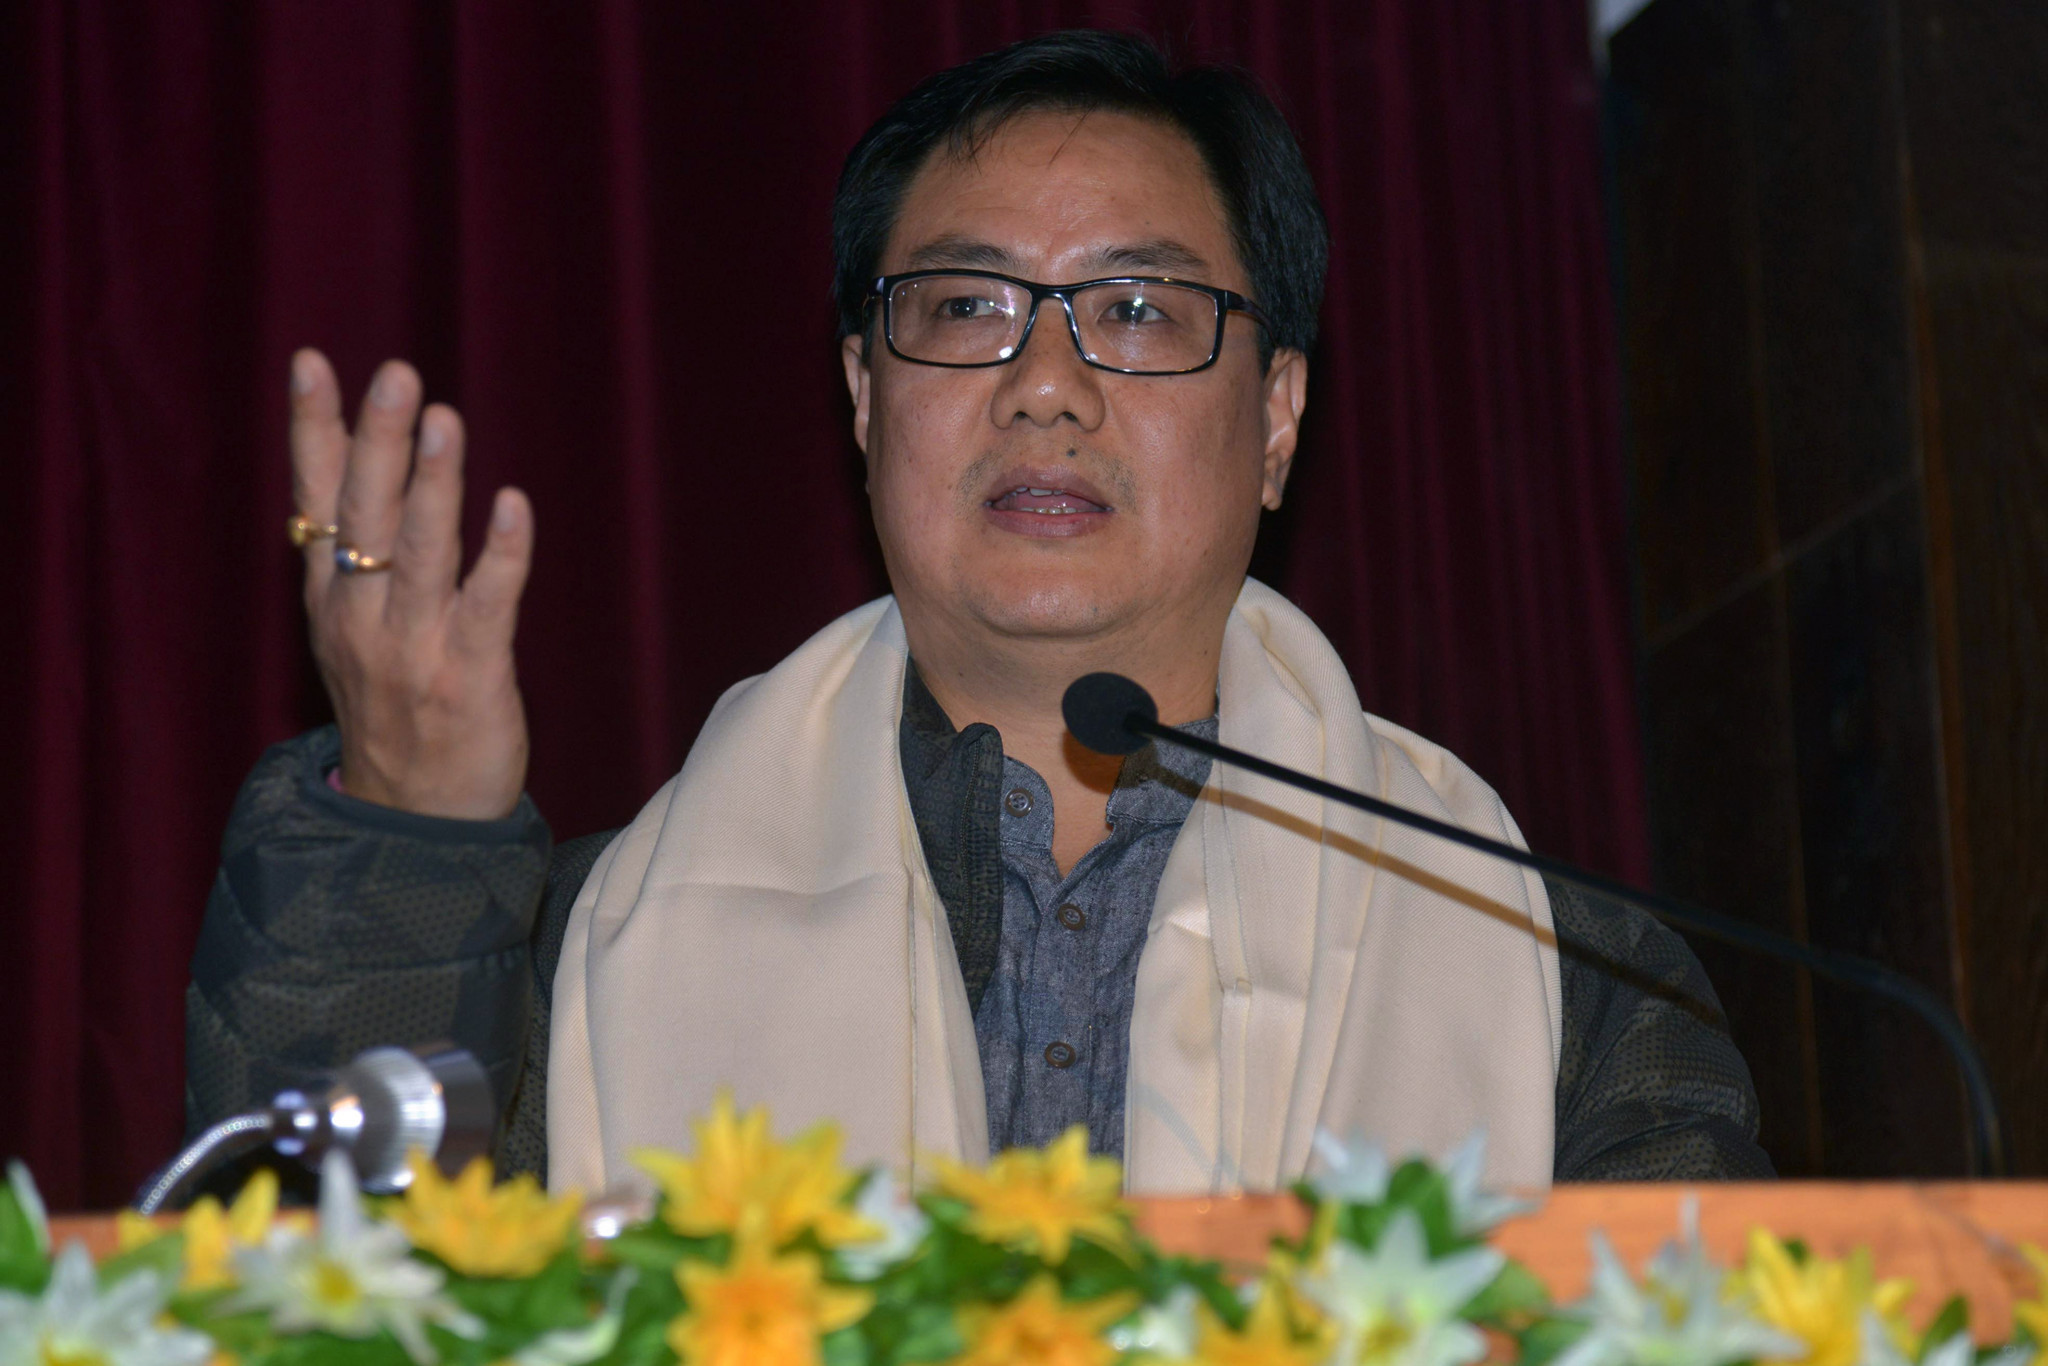 Indian Sports Minister Kiren Rijiju revealed all athletes would be vaccinated against COVID-19 before Tokyo 2020 ©Getty Images